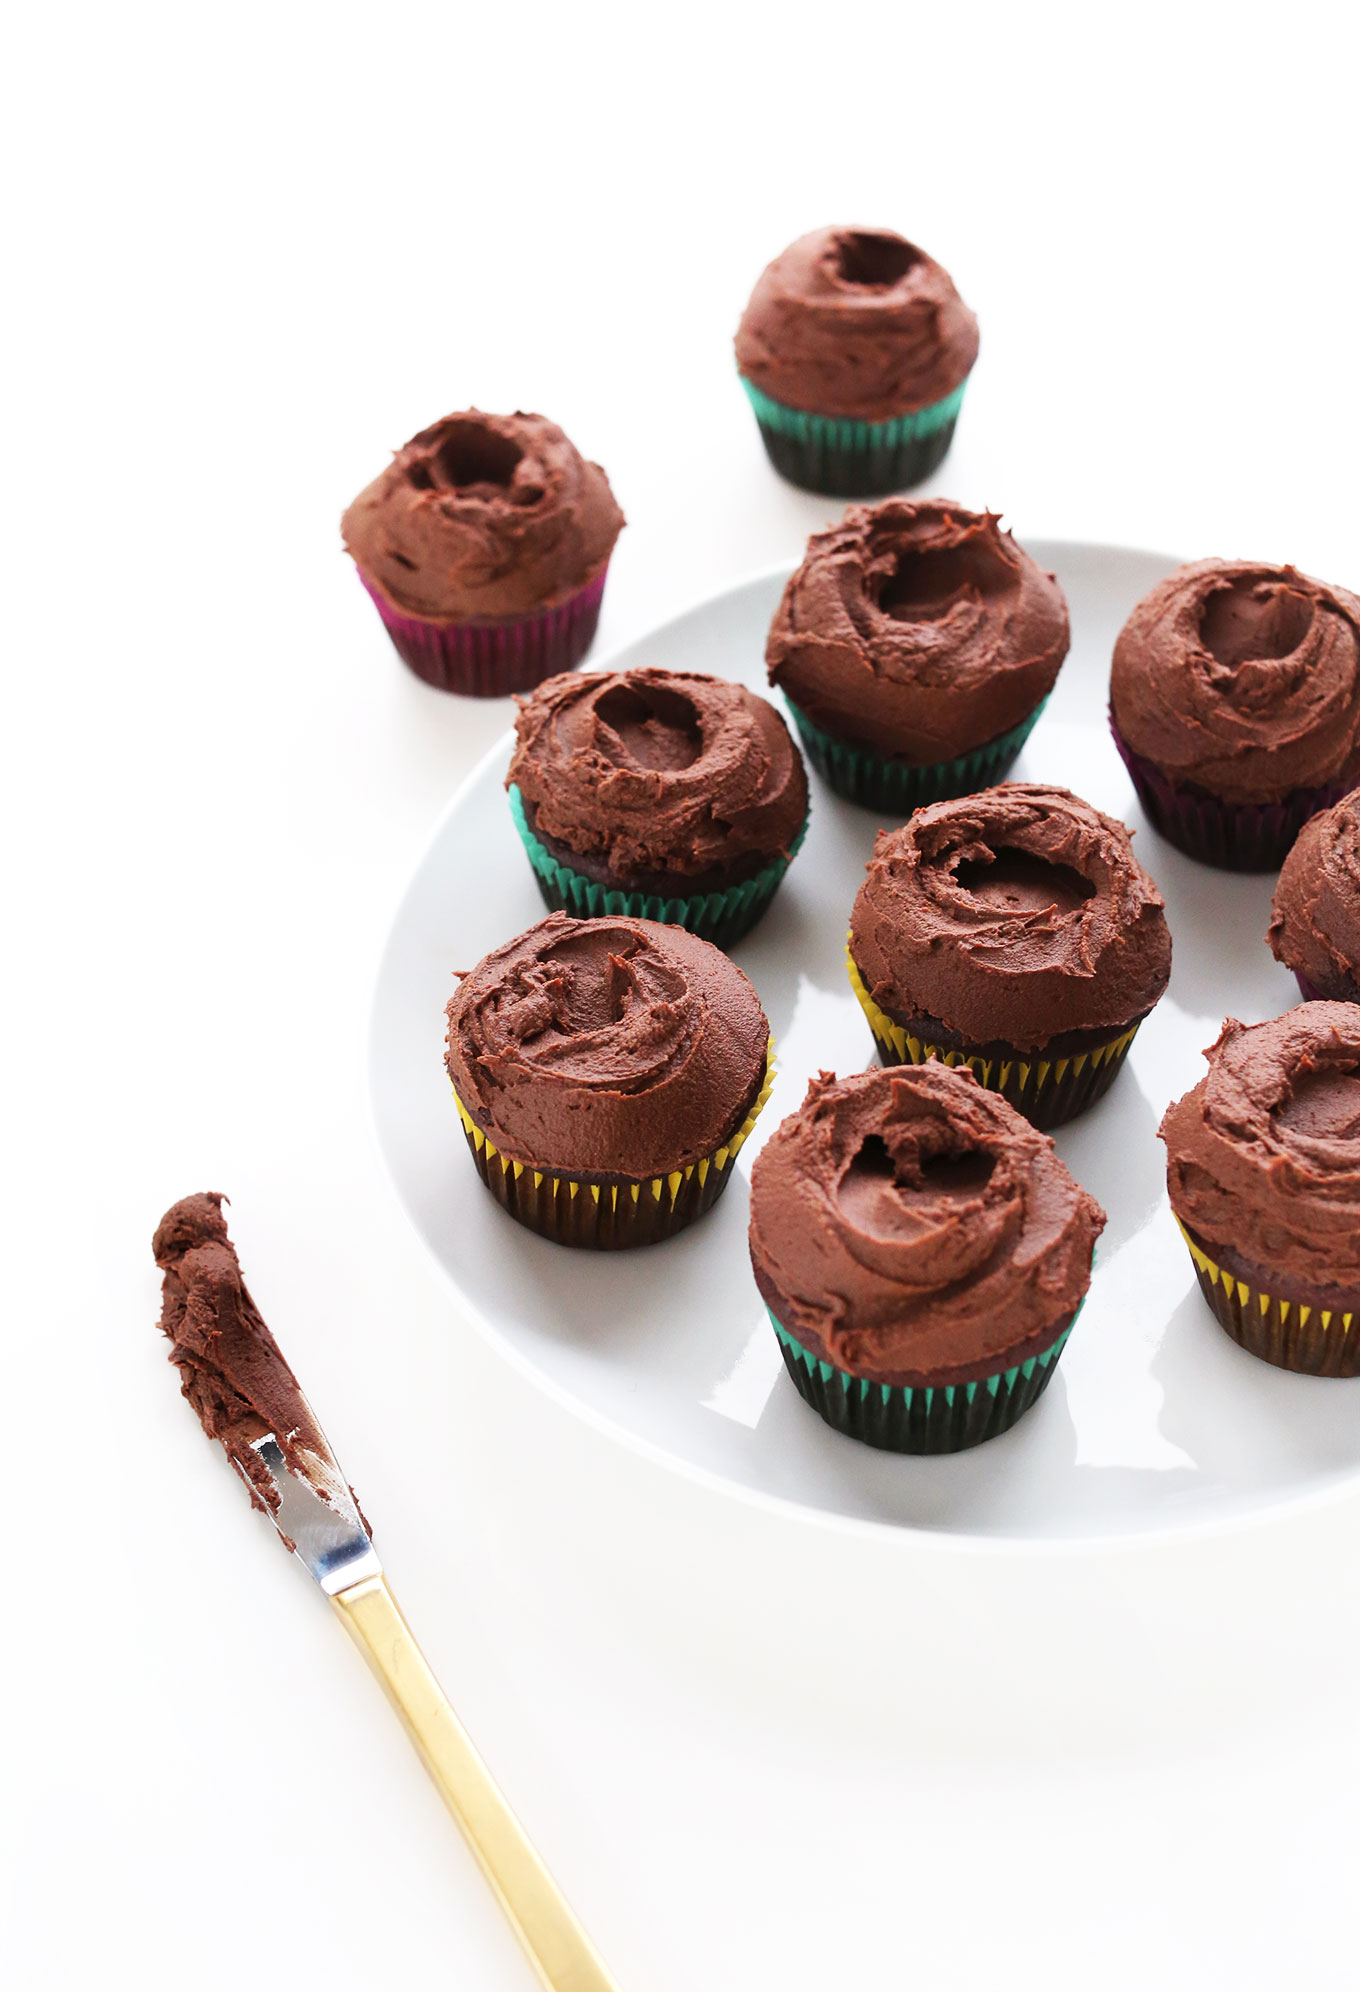 Plate of our fudgy vegan chocolate cupcakes with chocolate ganache frosting